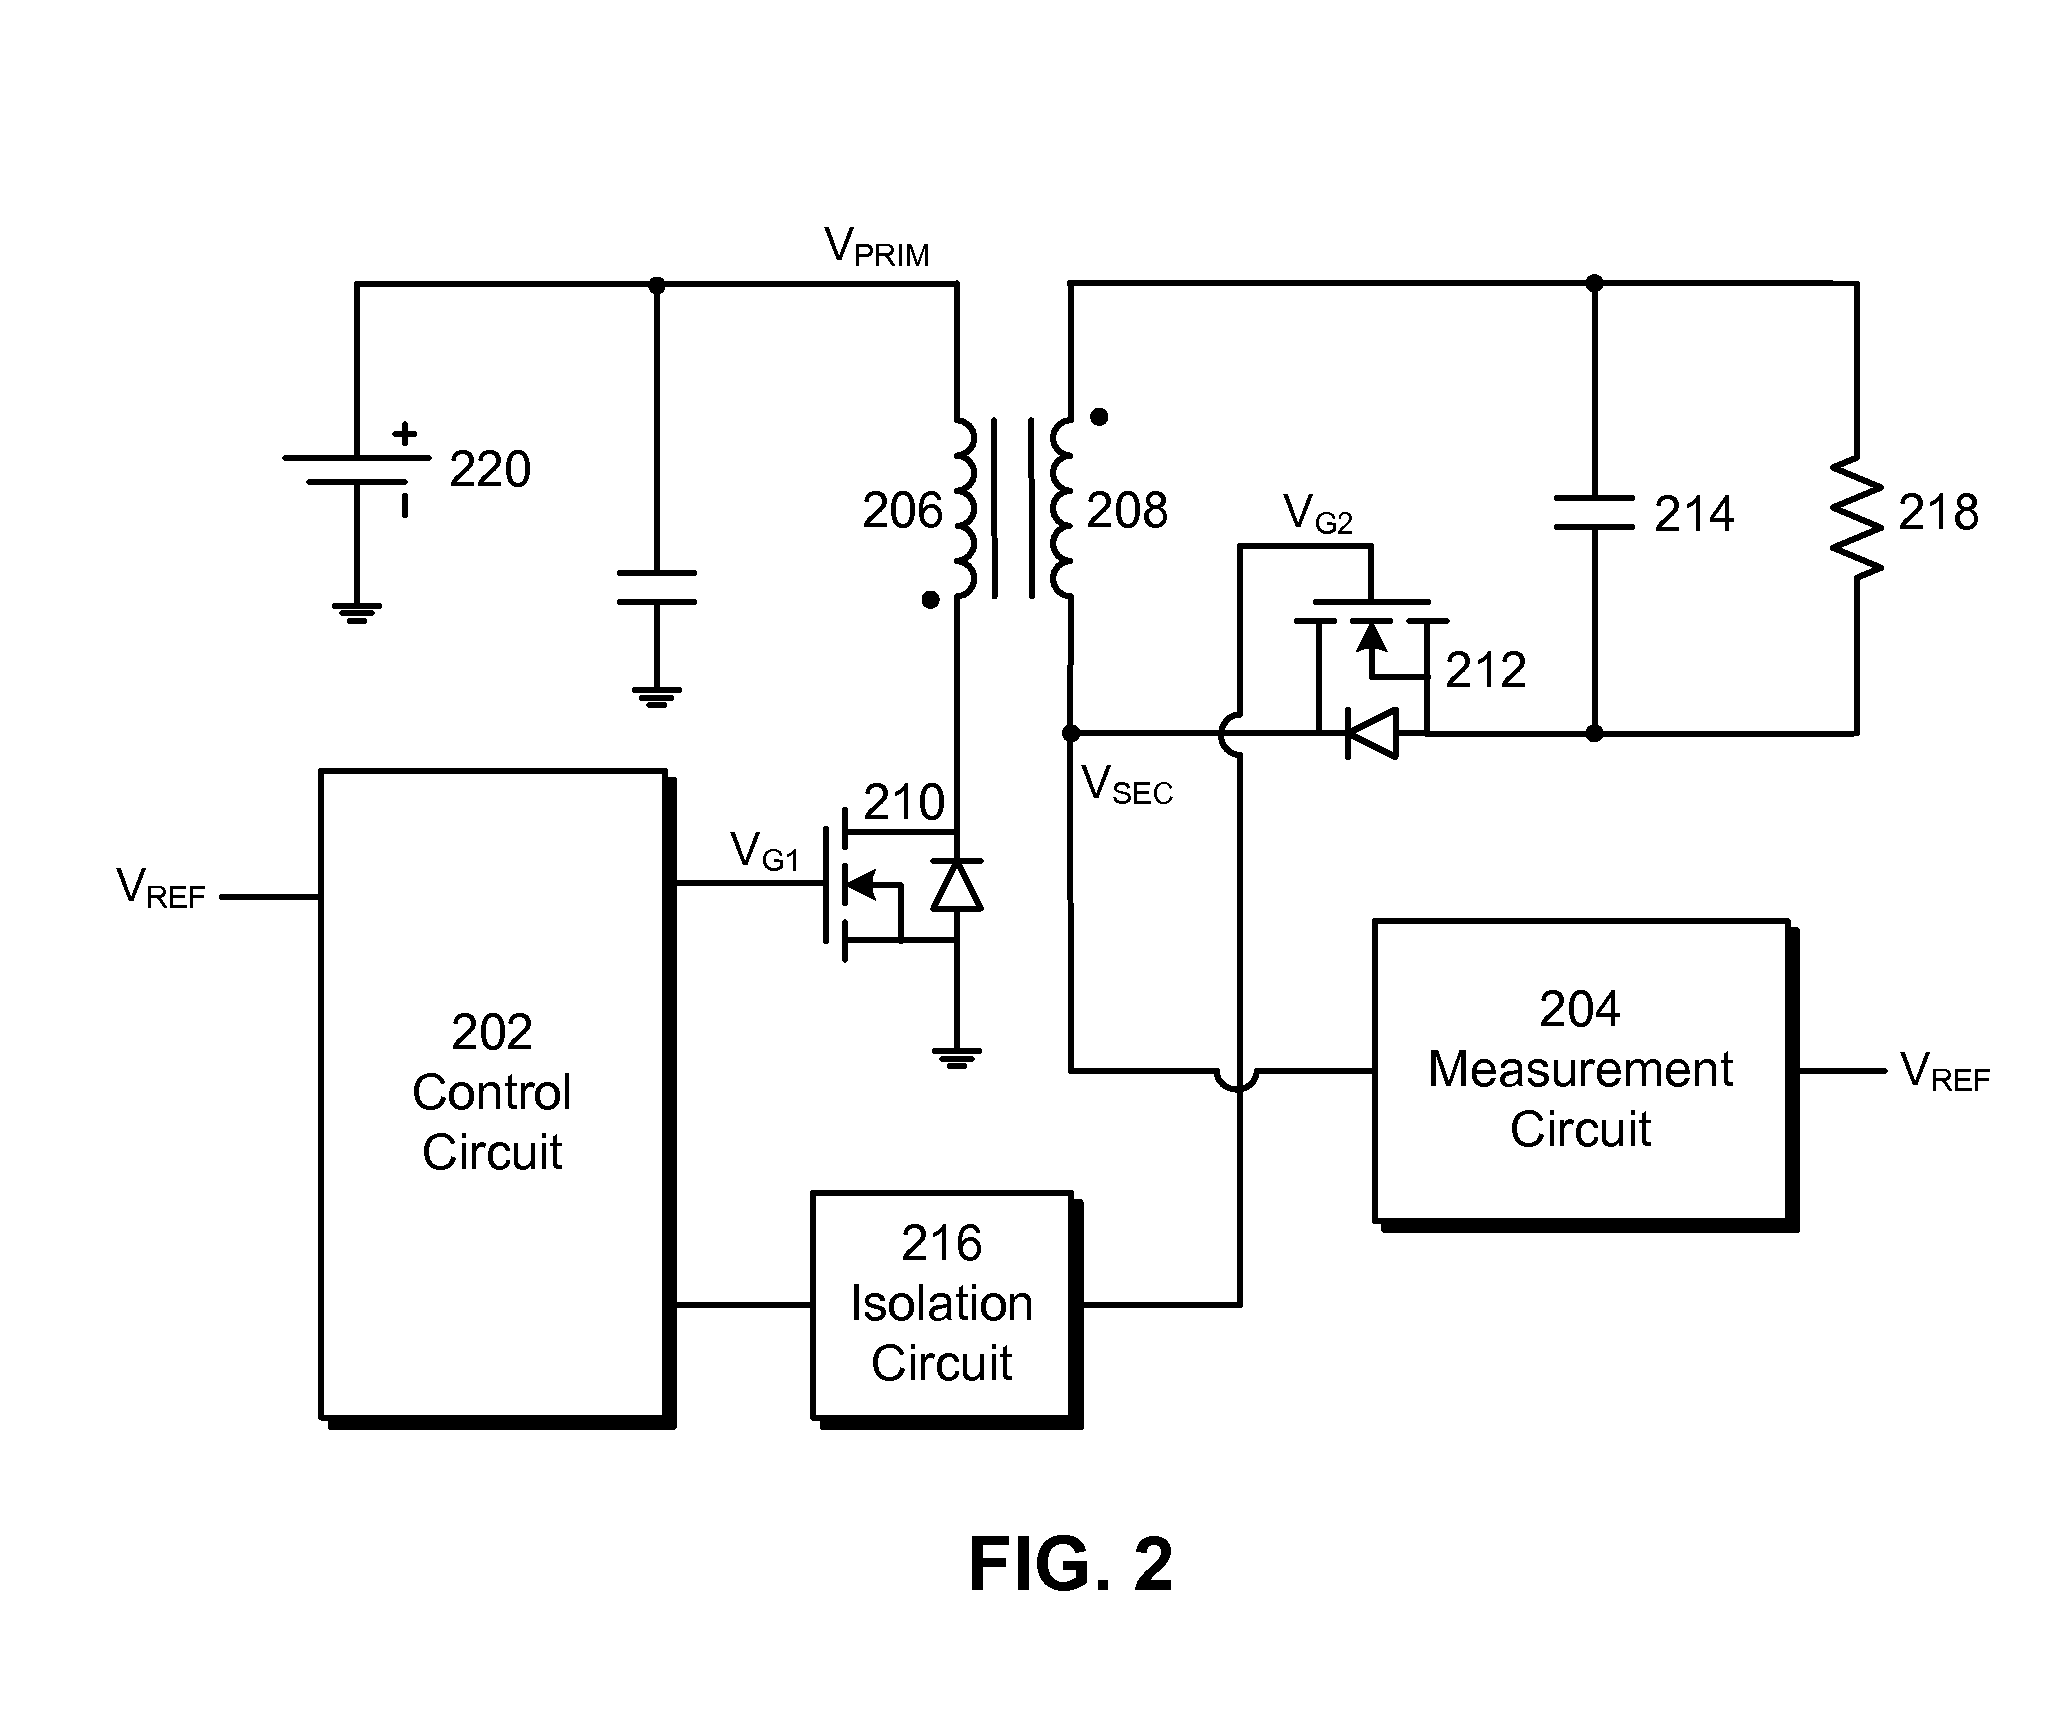 Zero voltage switching in flyback converters with variable input voltages